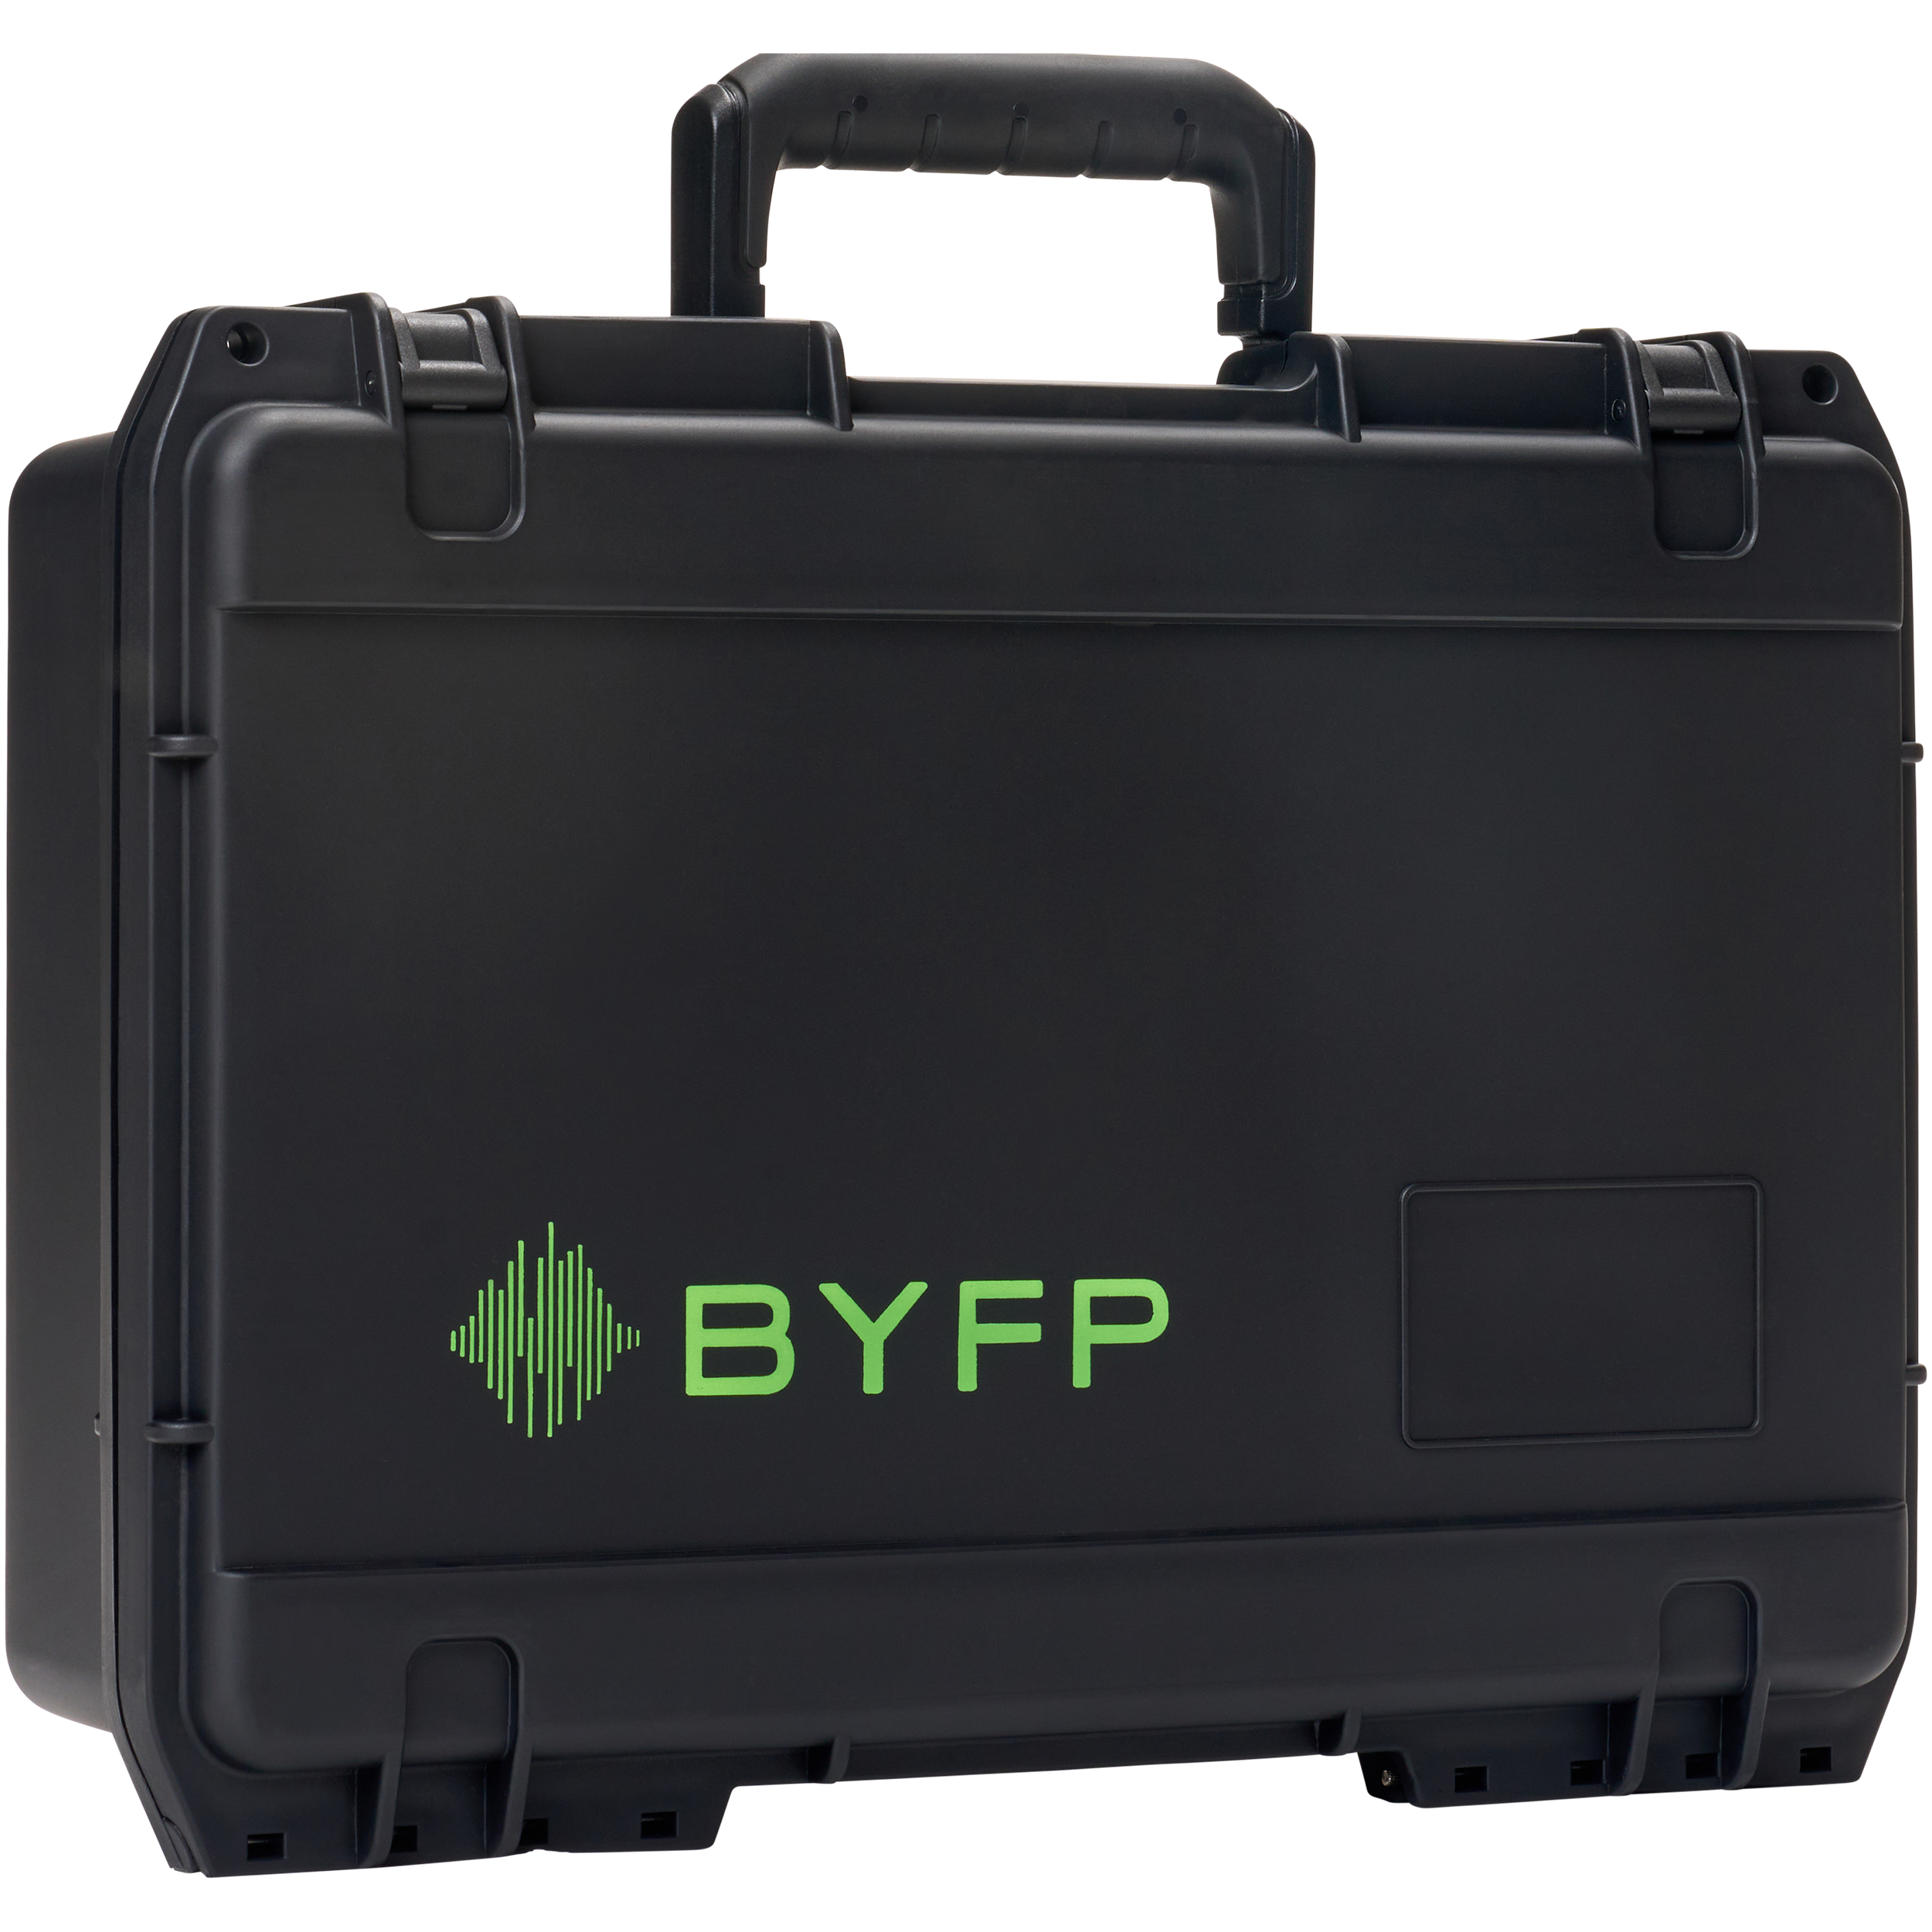 BYFP ipCase for 8x Wireless Handheld Transmitter Capsules